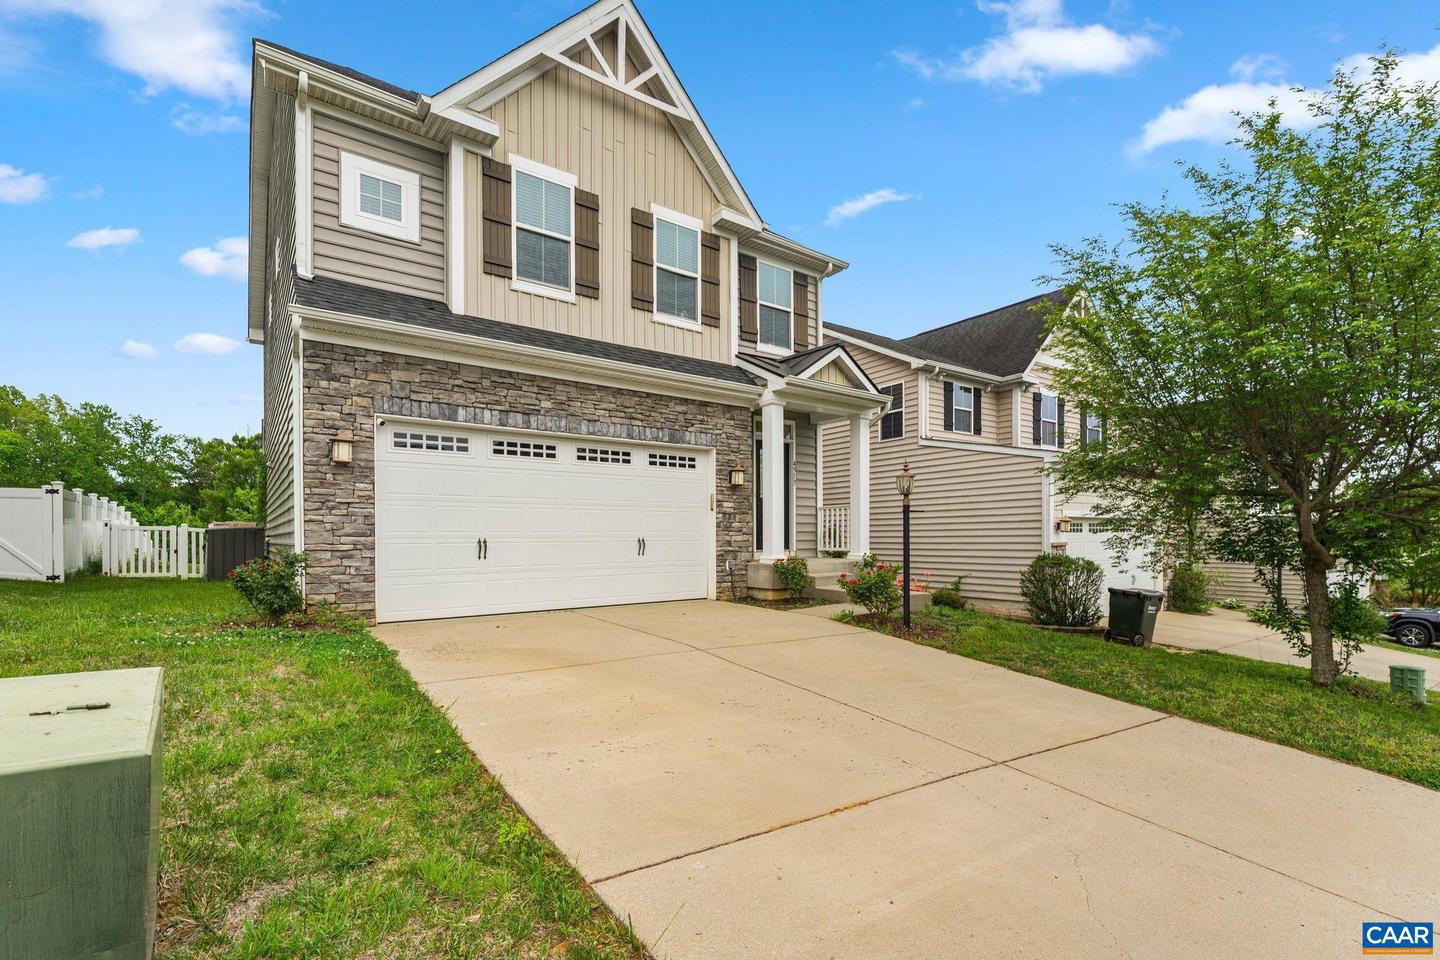 4517 BRIARWOOD DR, CHARLOTTESVILLE, Virginia 22911, 3 Bedrooms Bedrooms, ,3 BathroomsBathrooms,Residential,For sale,4517 BRIARWOOD DR,652553 MLS # 652553